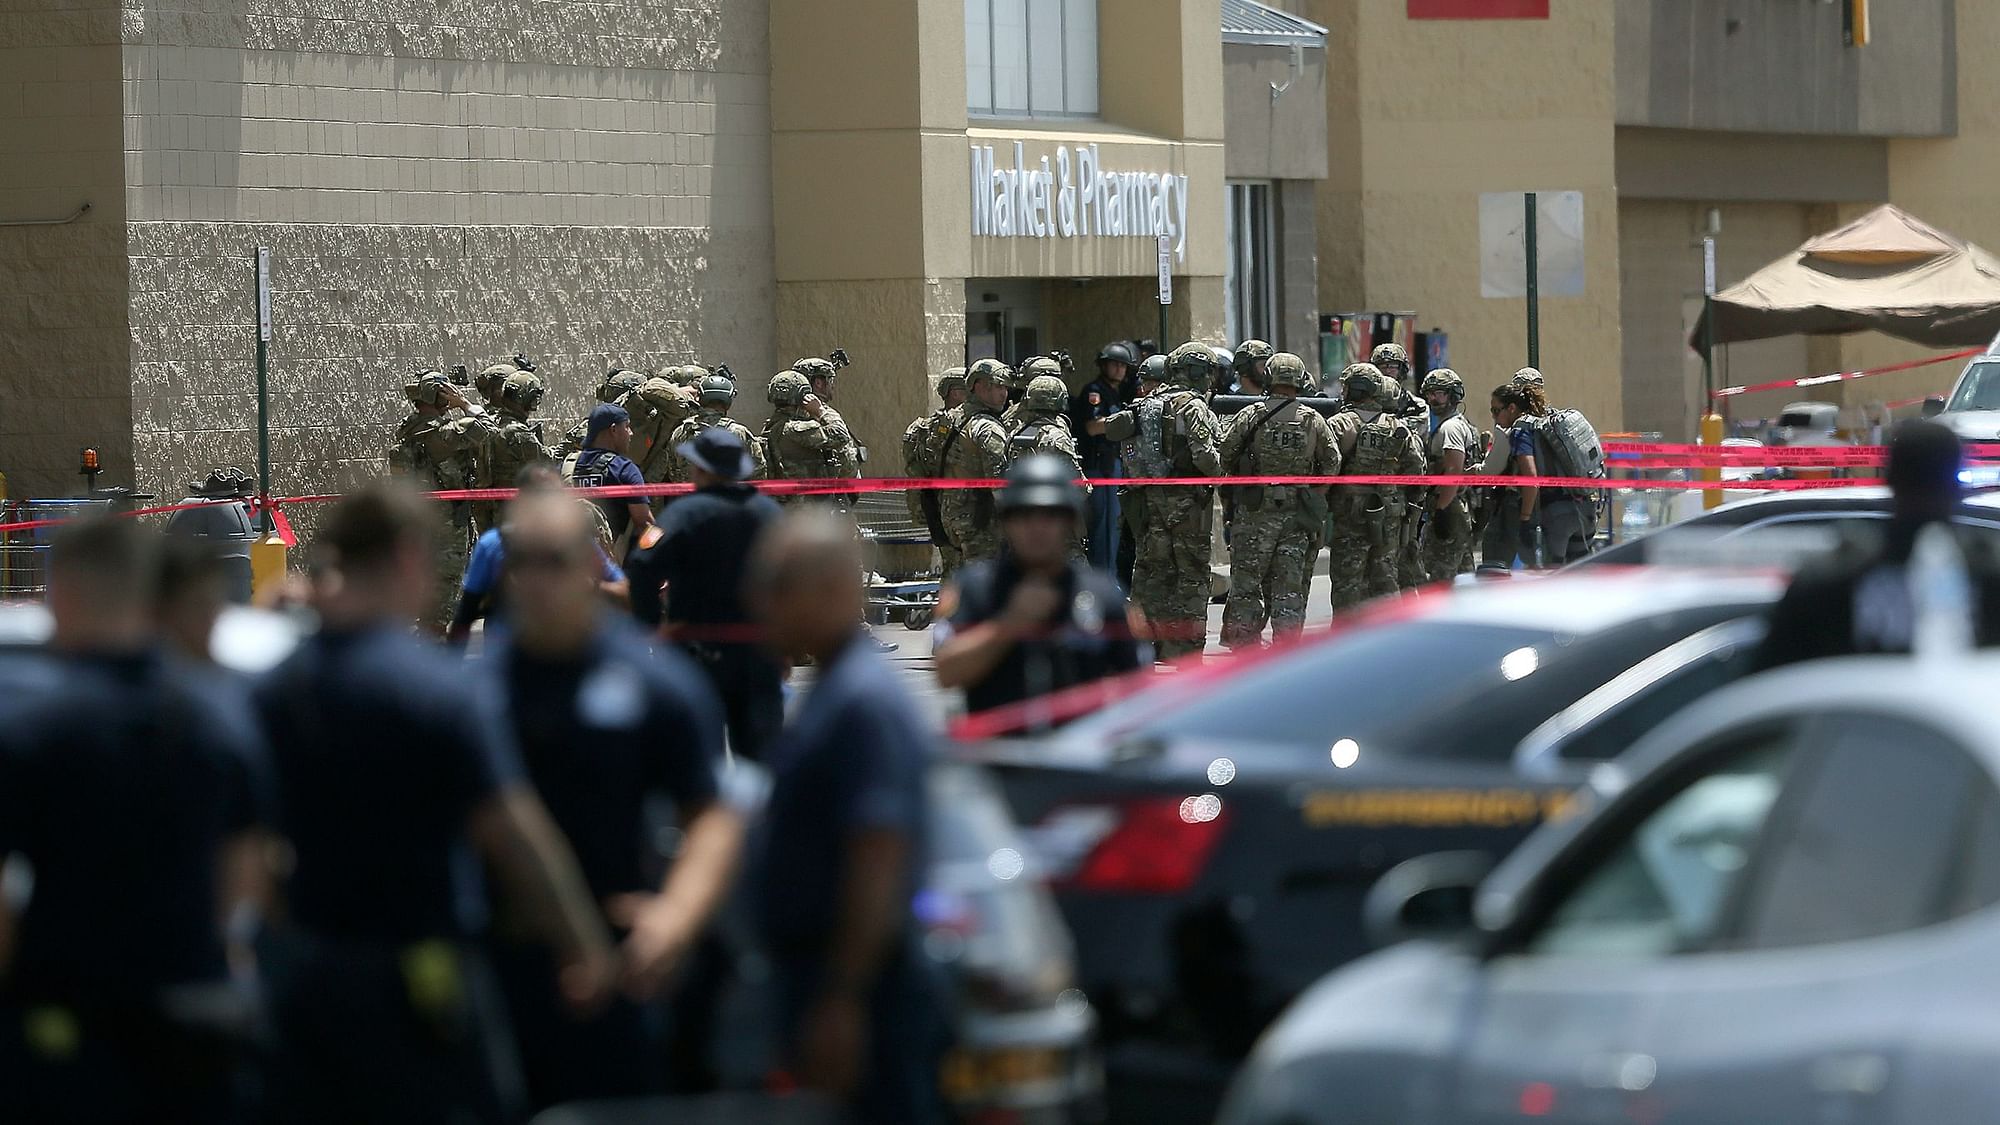 Security forces at the shopping complex in El Paso in Unired States’ Texas. A shooting at a shopping complex killed 20 people and injured more than two dozen.